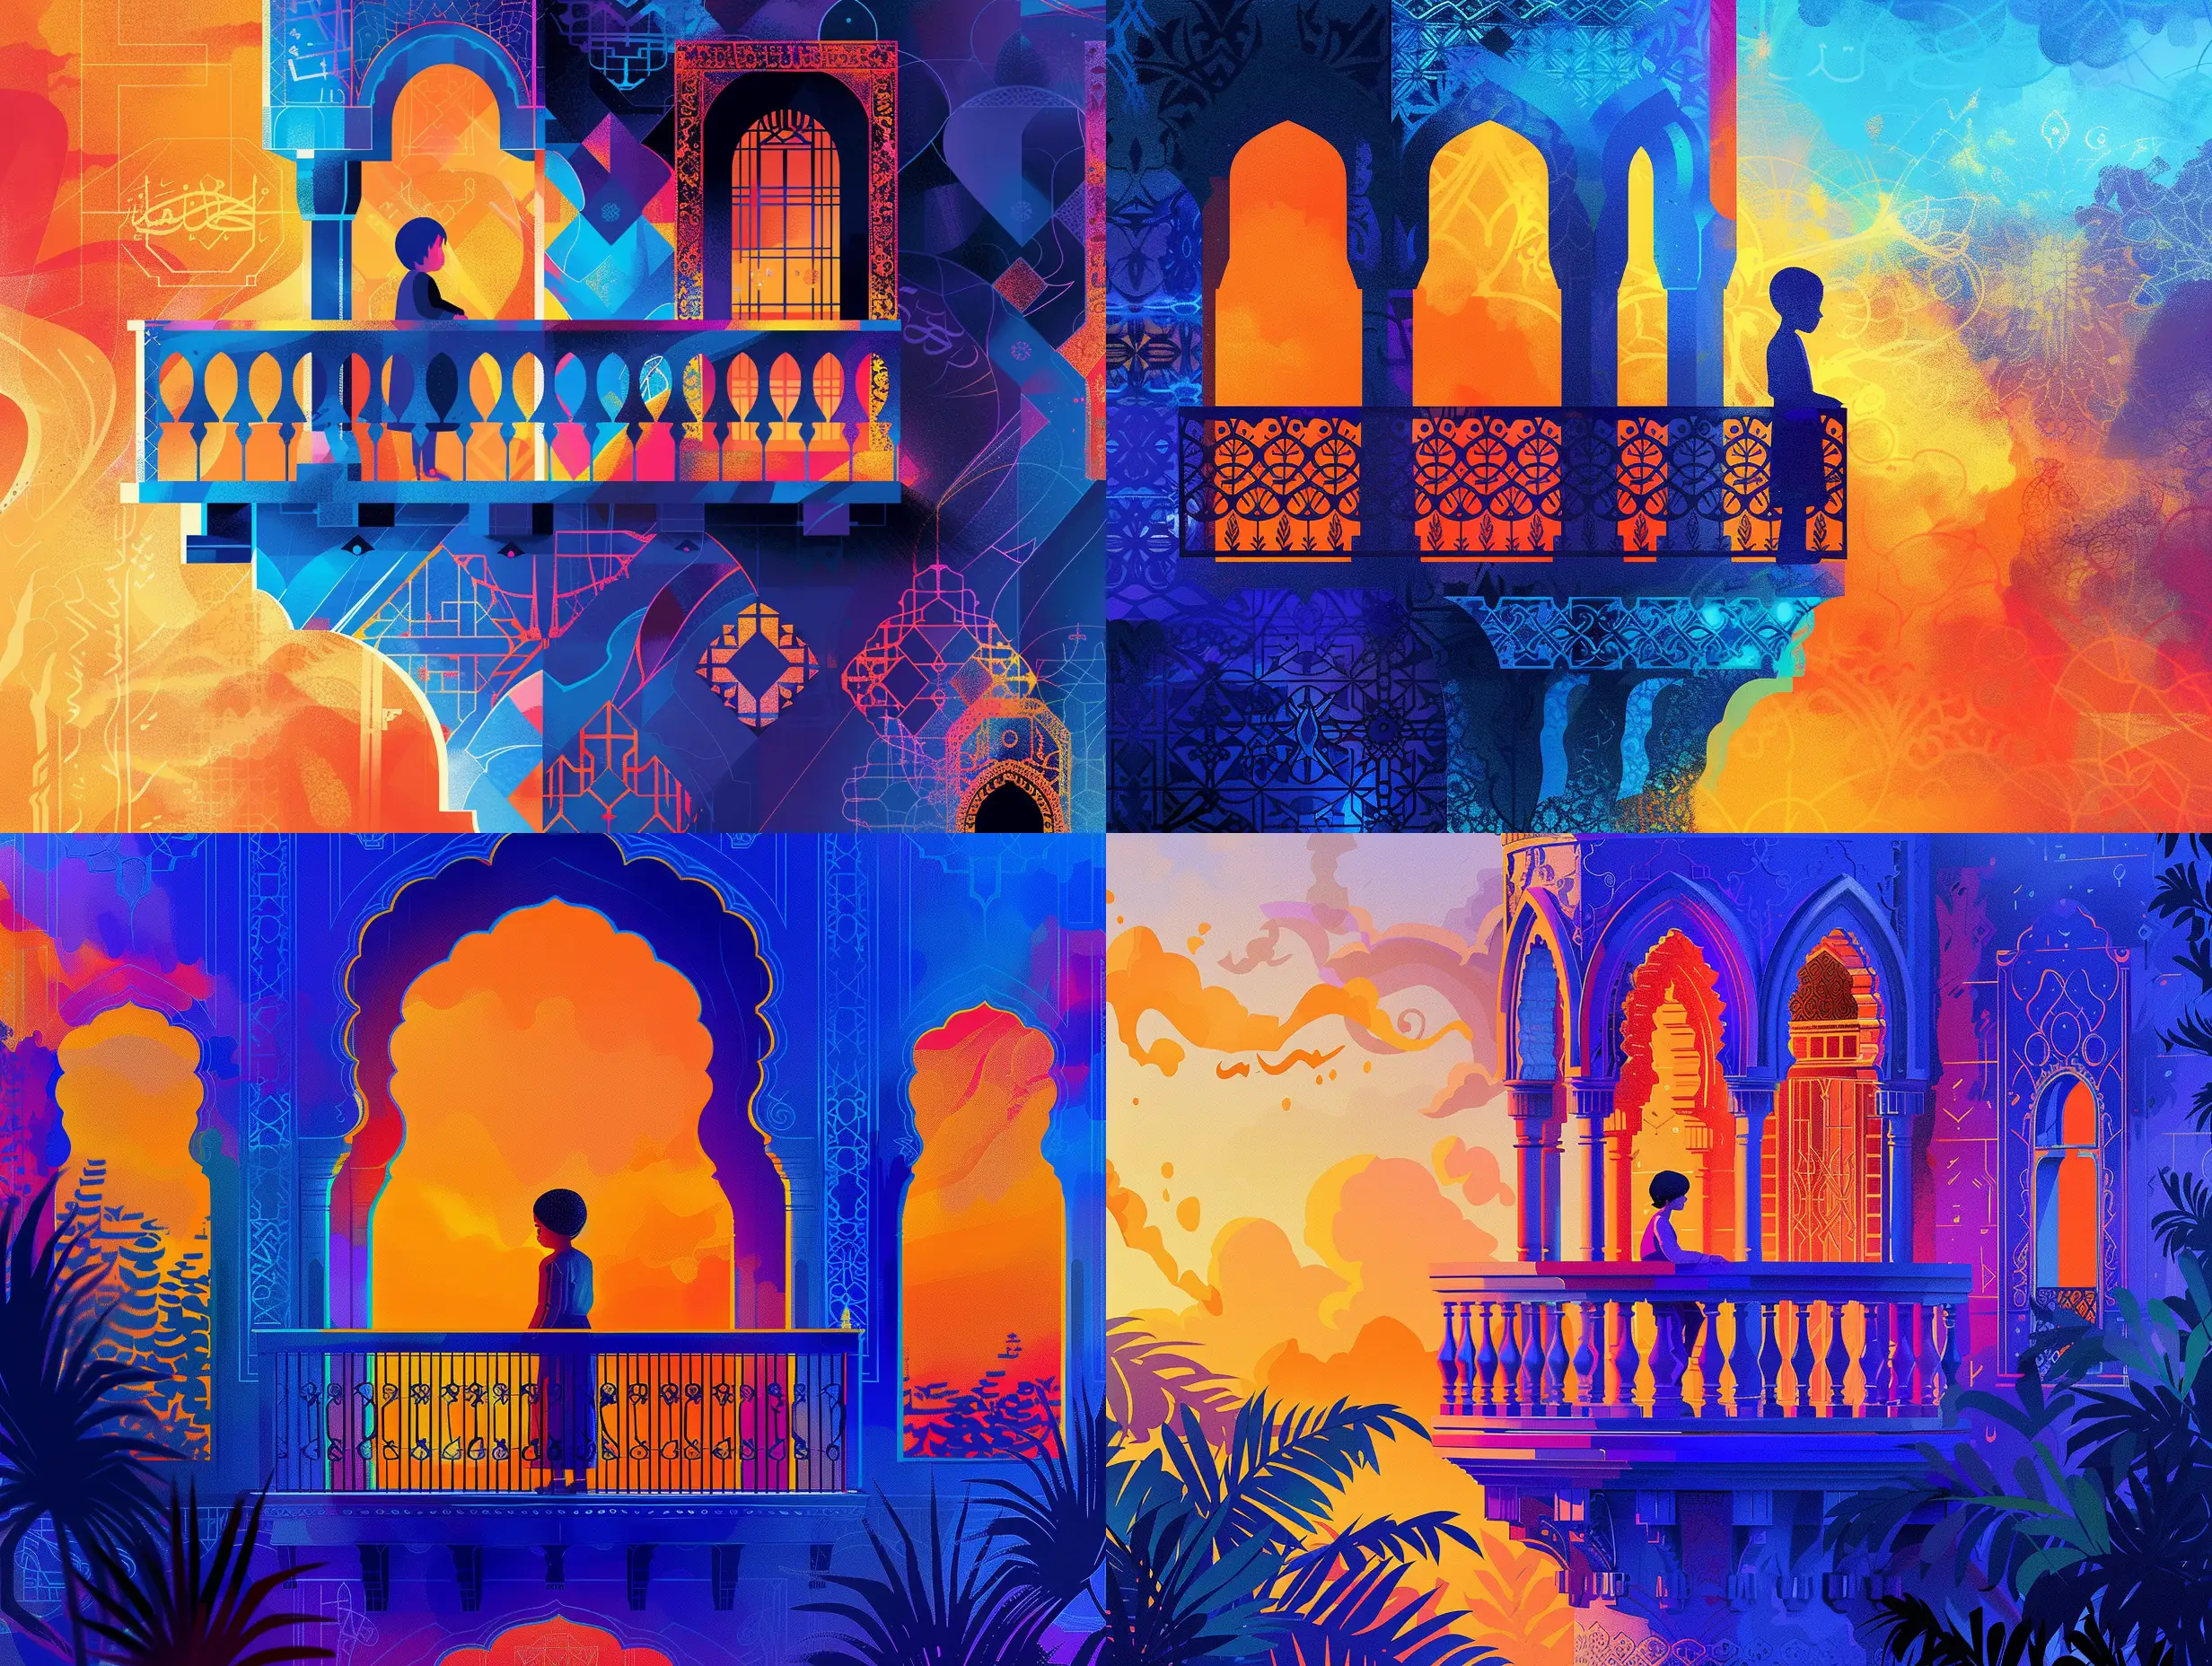 hild on balcony, 
Digital illustration, contemporary, smooth gradients, vibrant color palette with deep blues, oranges, and purples, detailed texture mimicking the light play of a digital painting, complex composition with an emphasis on symmetry and Islamic architecture motifs